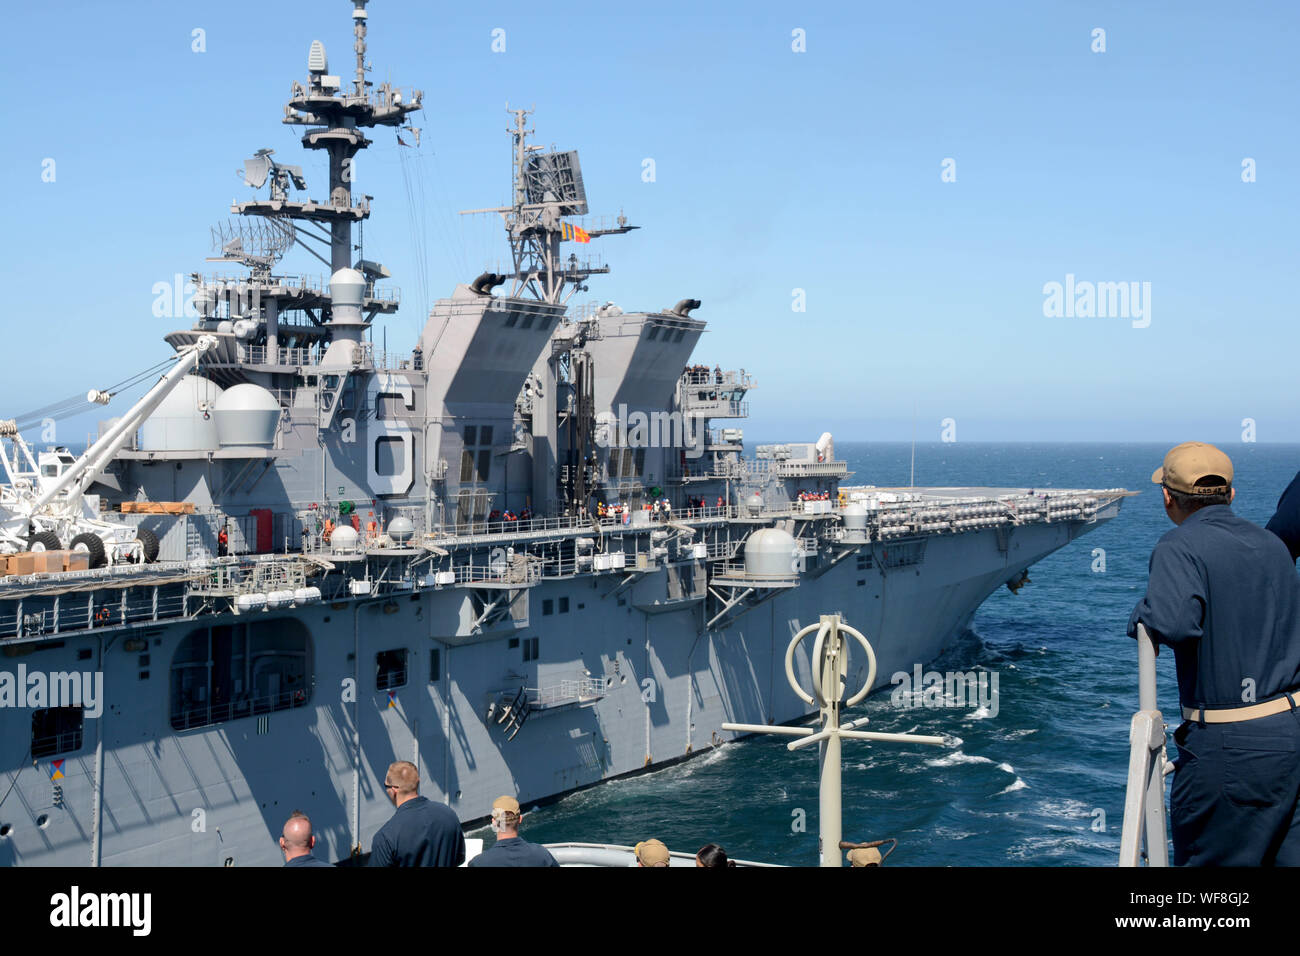 190820-N-XN177-0153 PACIFIC OCEAN (Aug. 20, 2019) –The dock landing ship USS Comstock (LSD 45) prepares to come along side amphibious assault ship USS America (LHA 6) during a replenishment at sea evolution. Comstock is currently underway conducting routine operations. This year USS Comstock will participate in the U.S. Navy Fleet Week in Los Angeles. (U.S. Navy Photo by Mass Communication Specialist 1st Class Peter Burghart/Released) Stock Photo